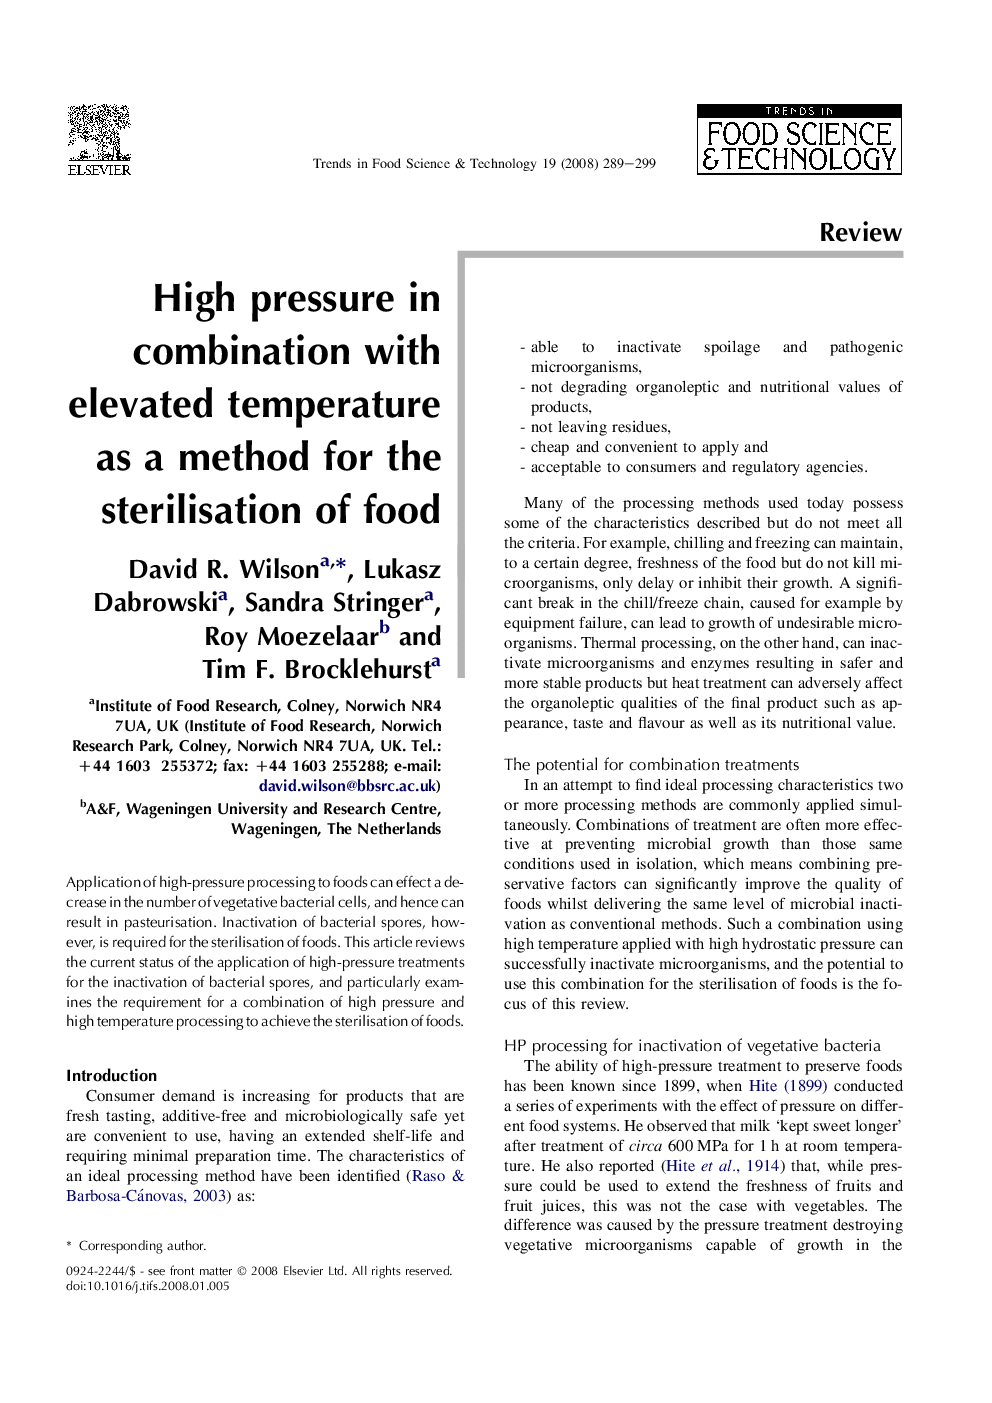 High pressure in combination with elevated temperature as a method for the sterilisation of food